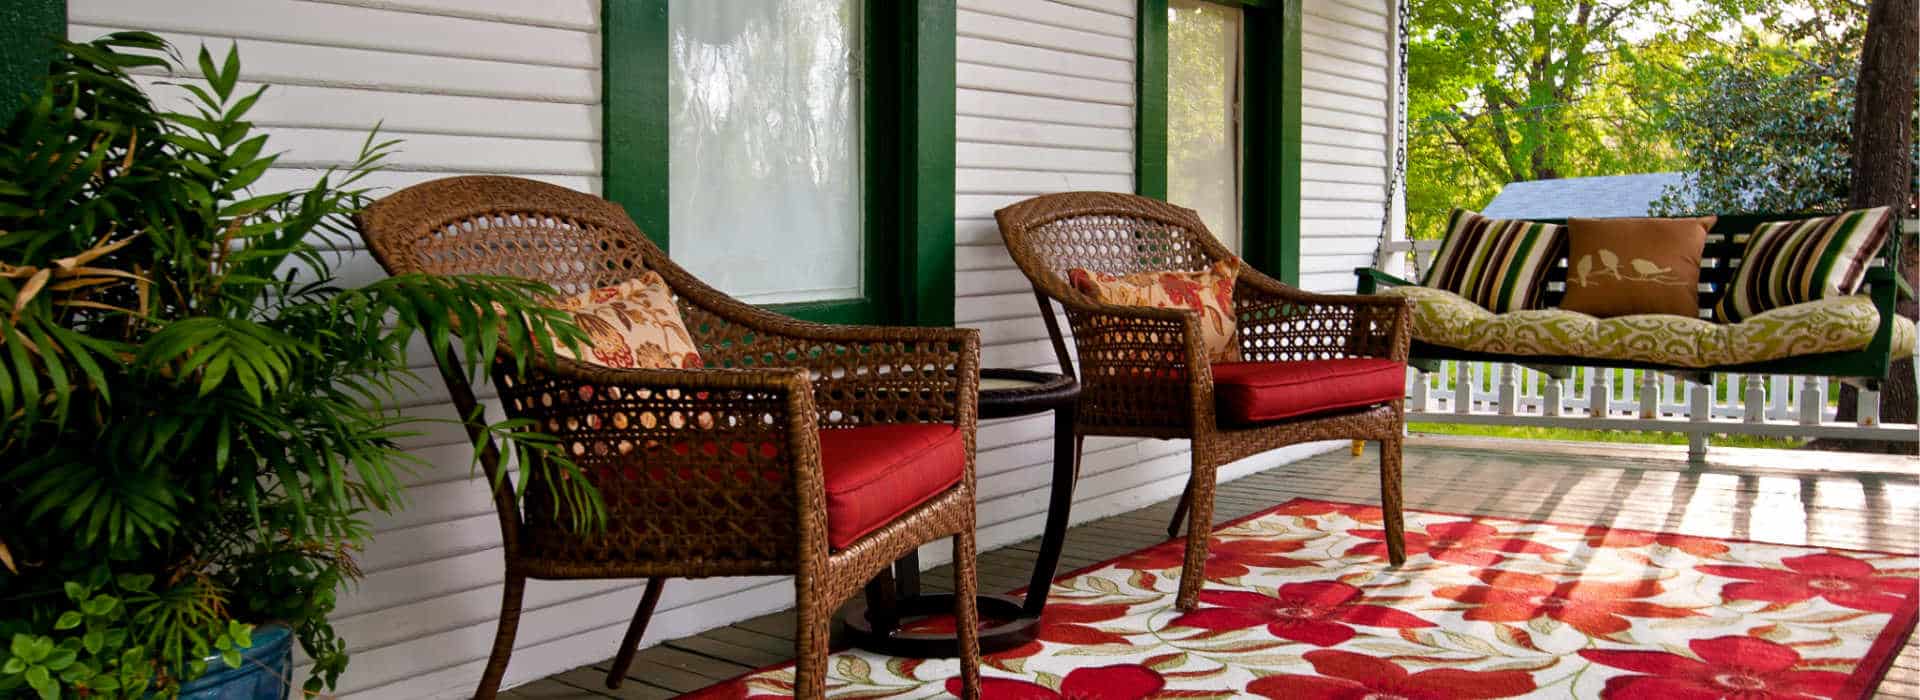 chairs on red flower rug and a porch swing